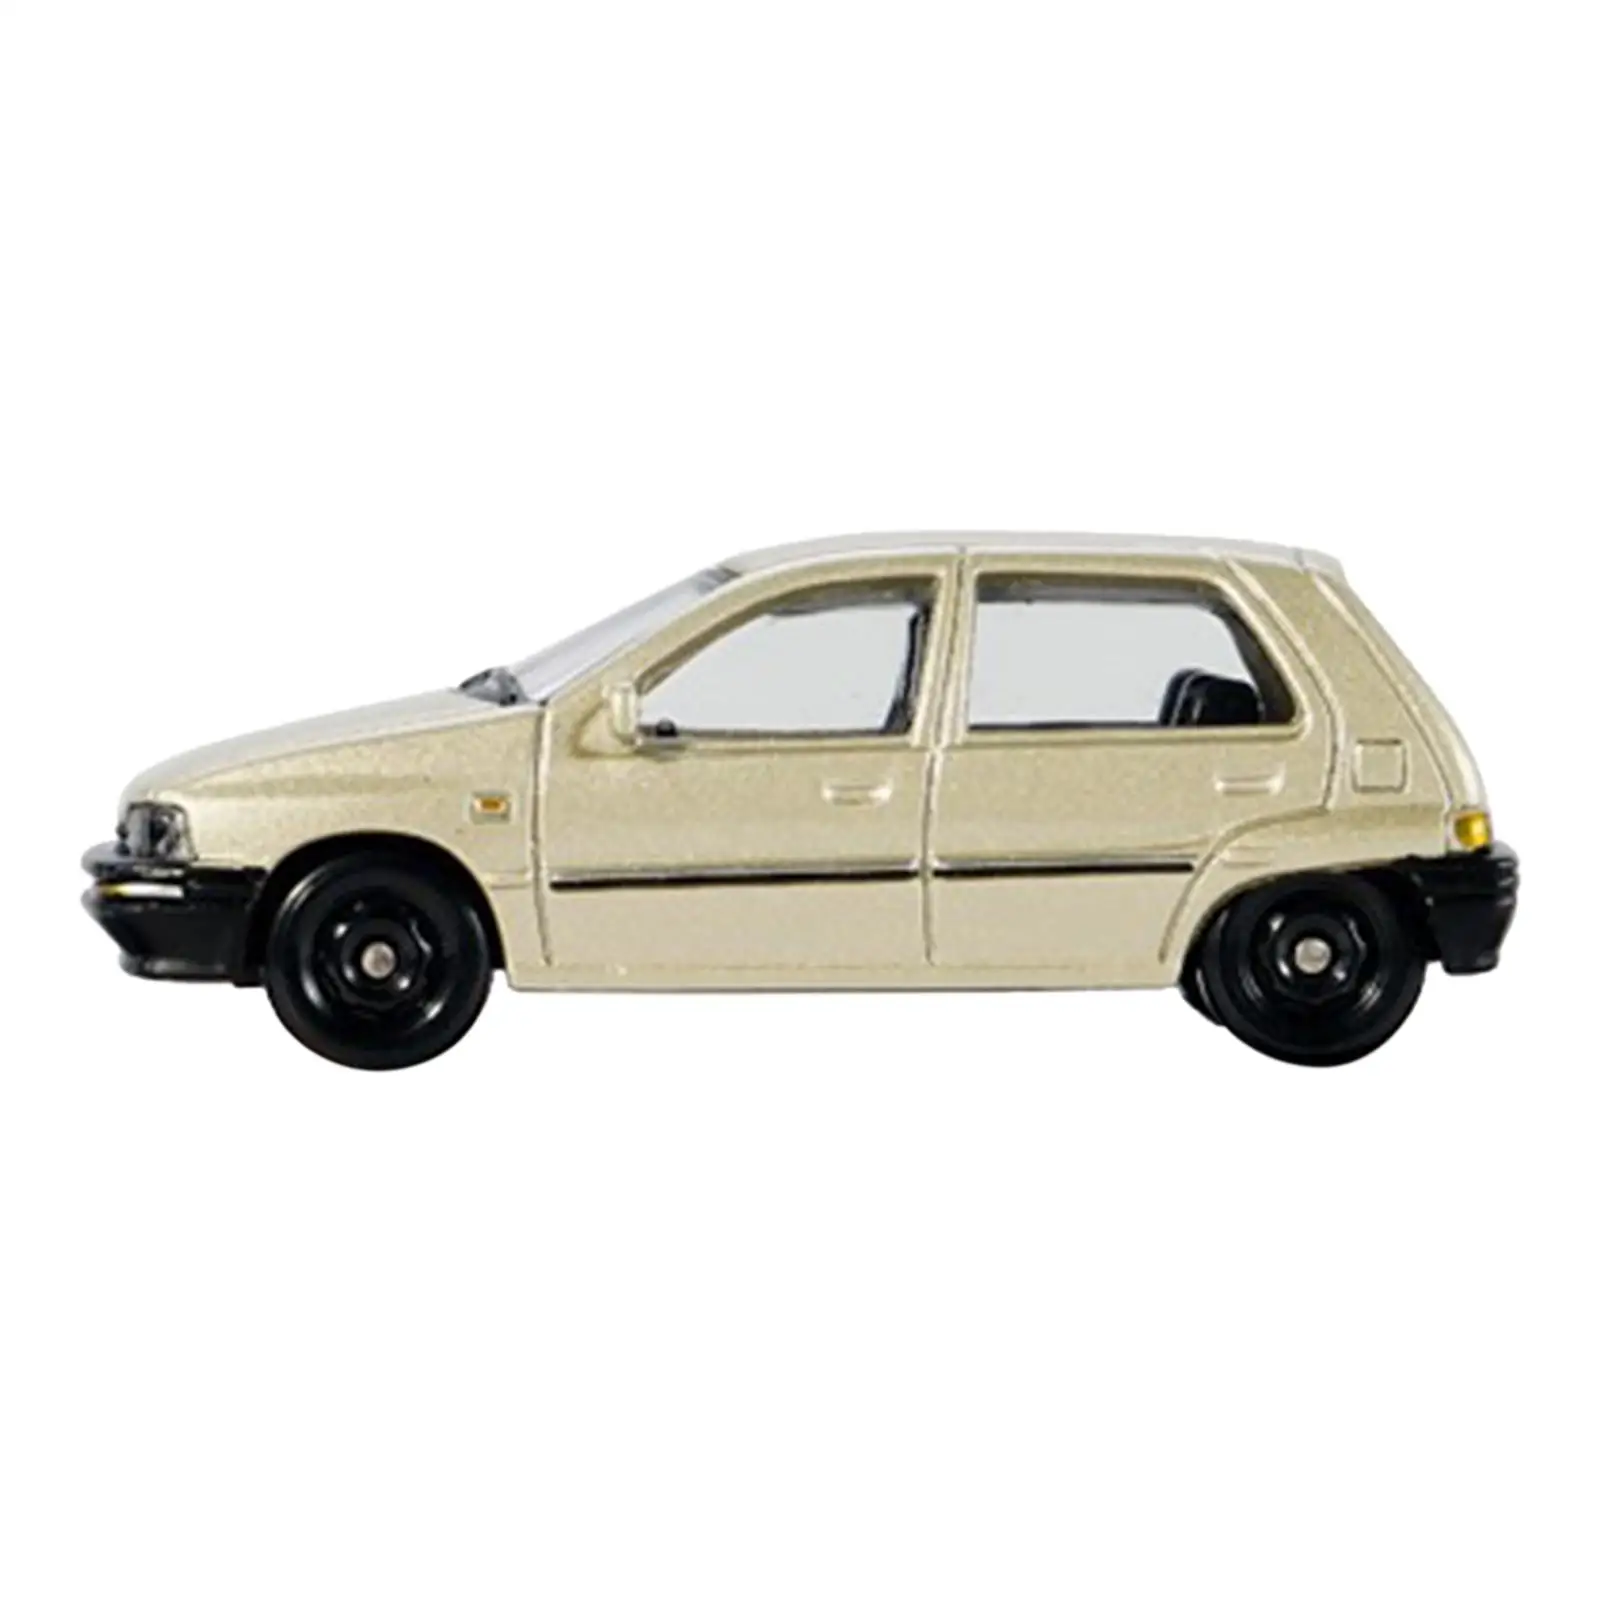 

Model Car Realistic Collectible Metal Pull Back Authentic Decor 1/64 Diecast Toy Car for Boy Girl Children Adults Toddlers